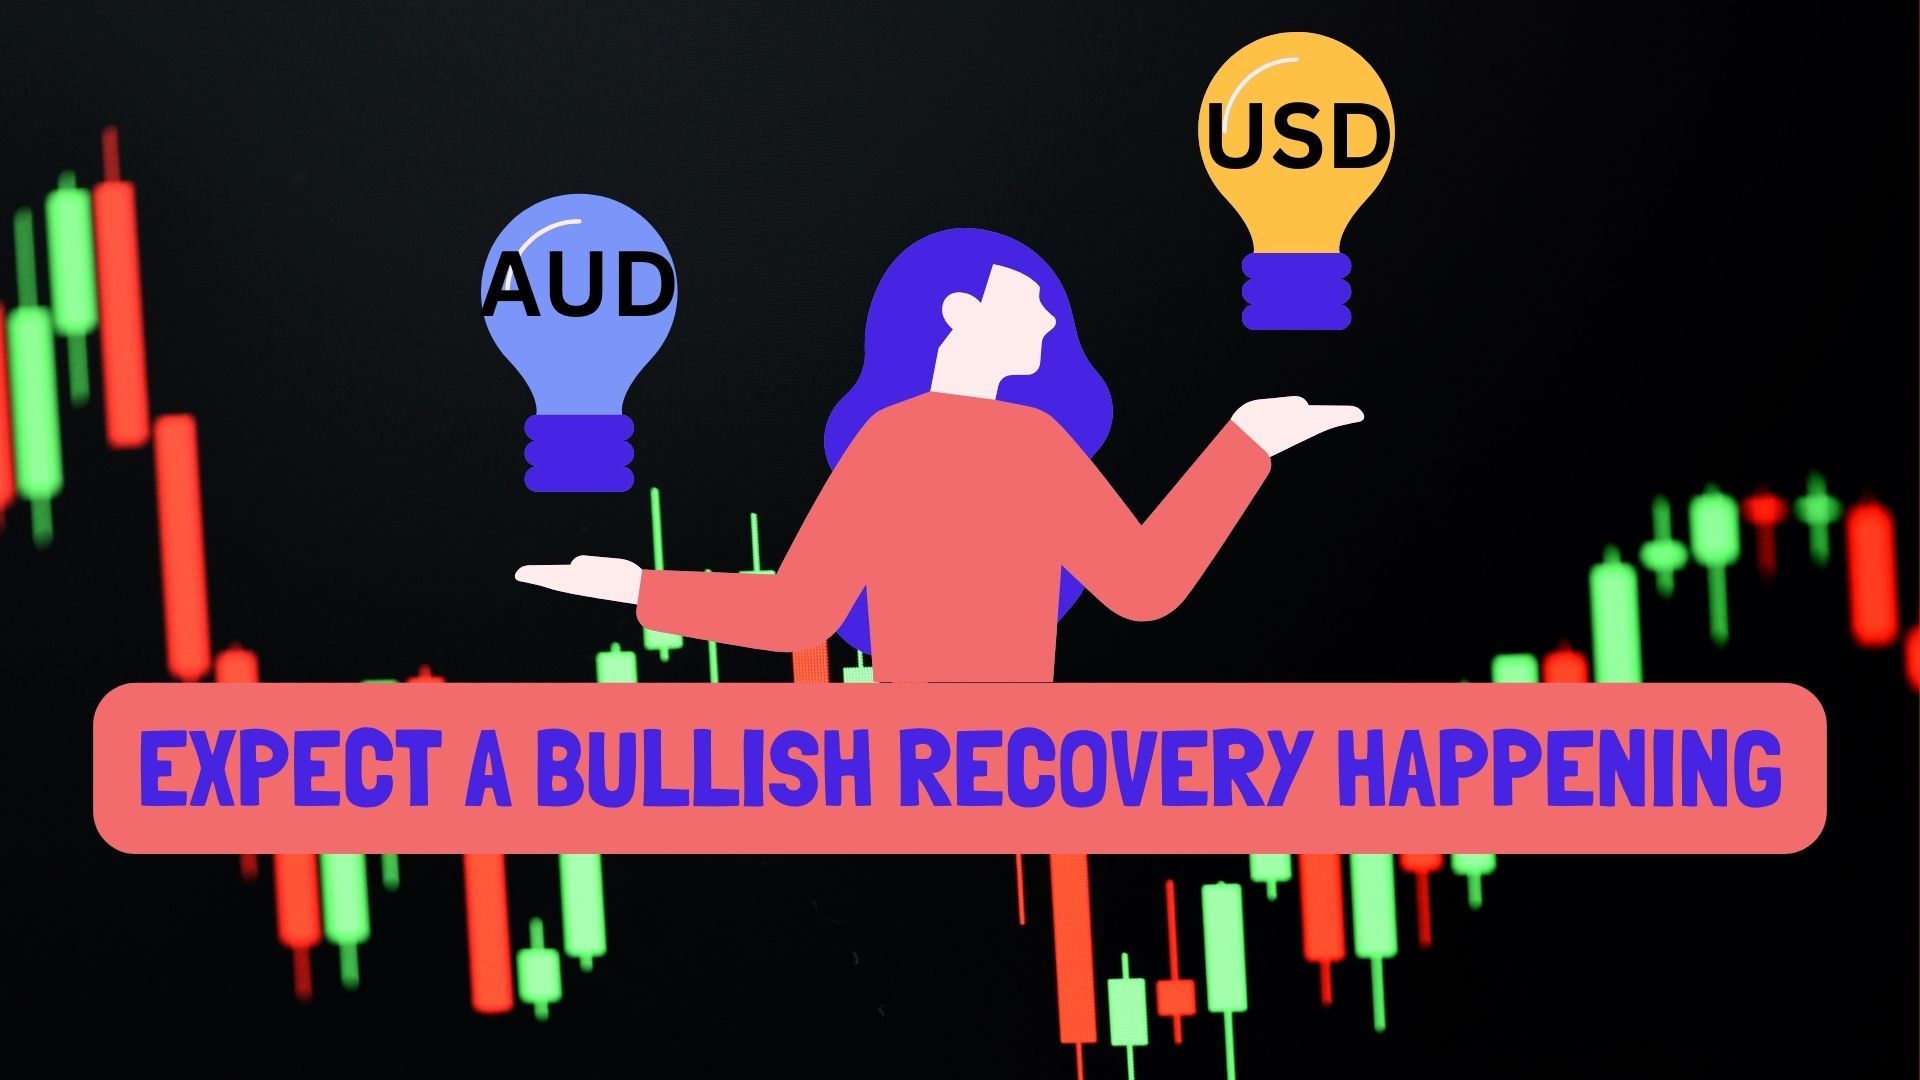 Can Expect a Bullish Recovery Happening